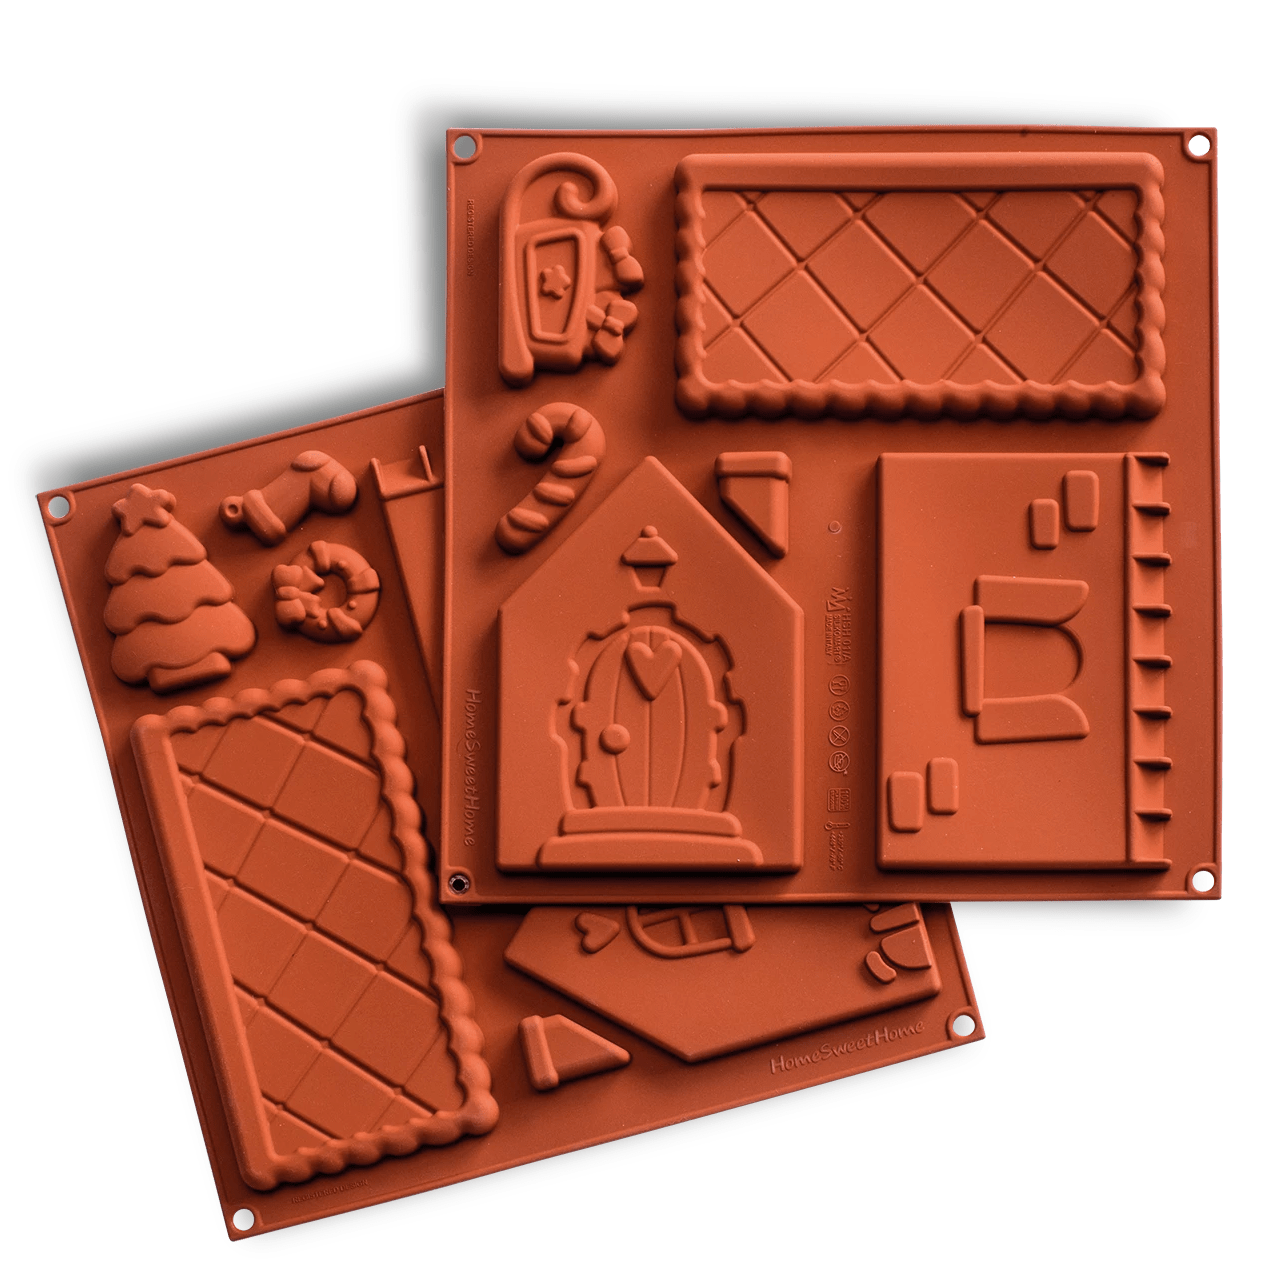 Silikomart Silicone Gingerbread House Silicone Moulds